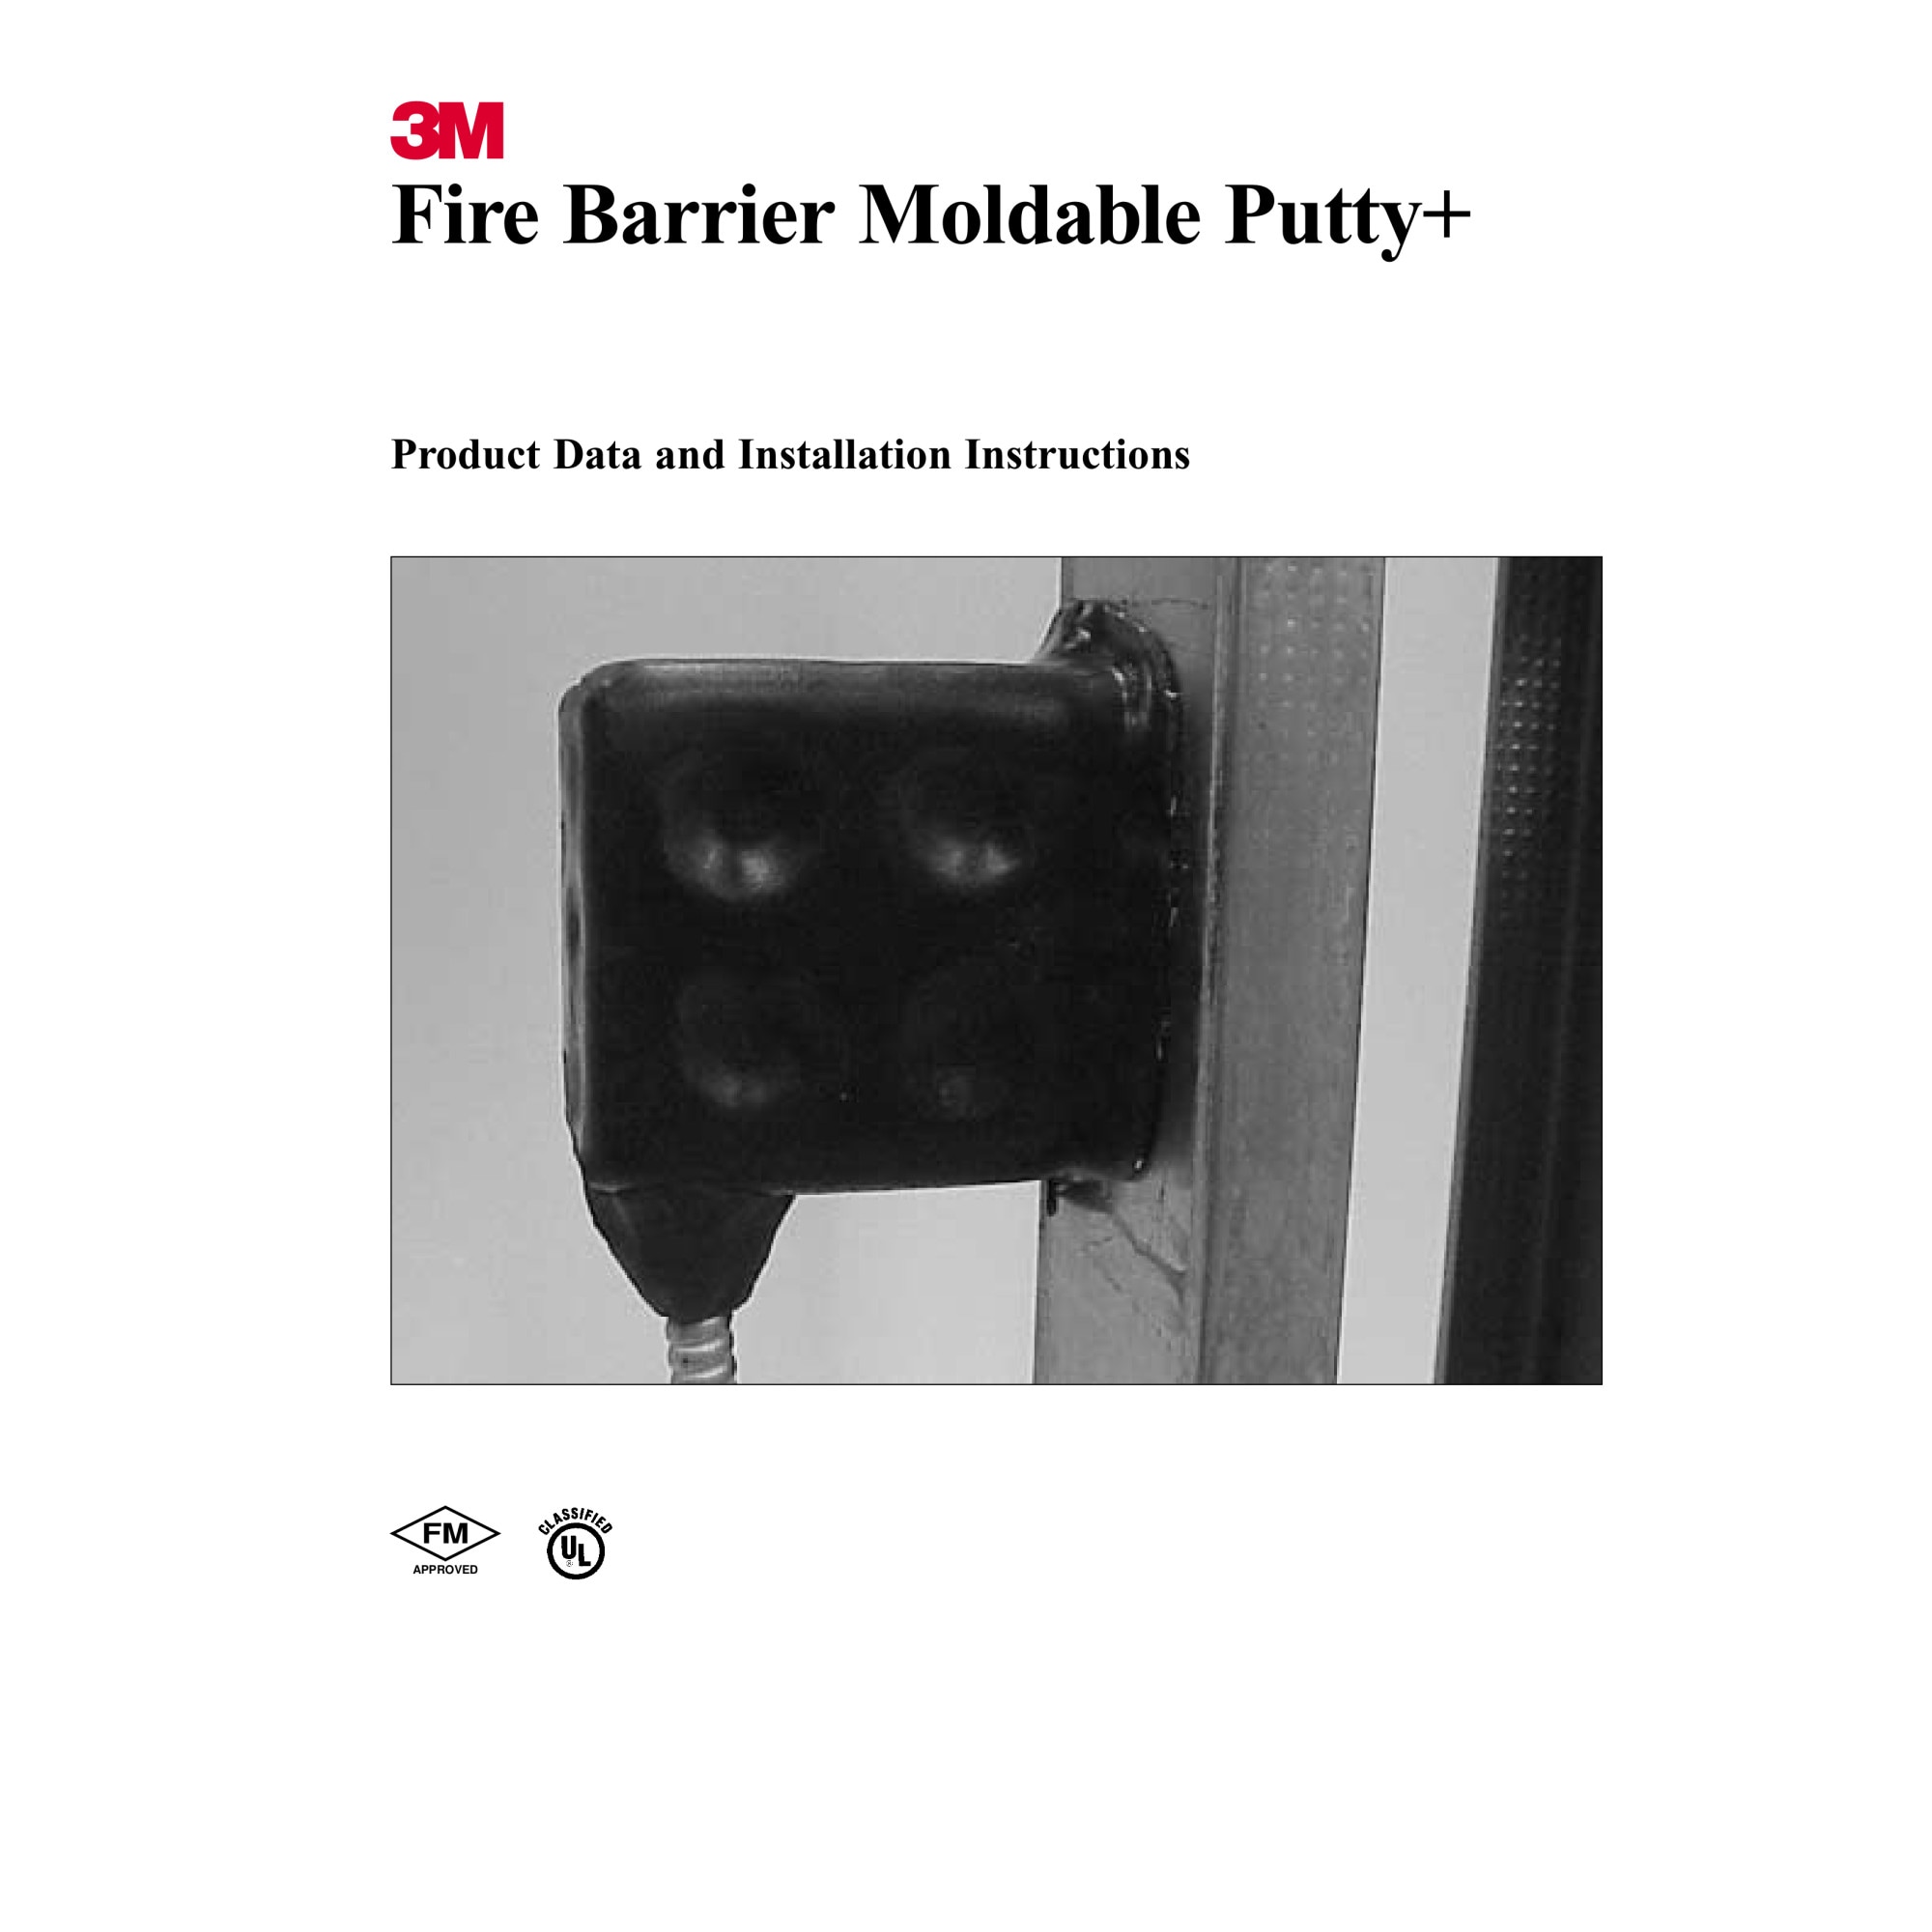 3M™ Fire Barrier Moldable Putty Stix MP+, 1.45 in x 6 in, 12 per case  7000059397